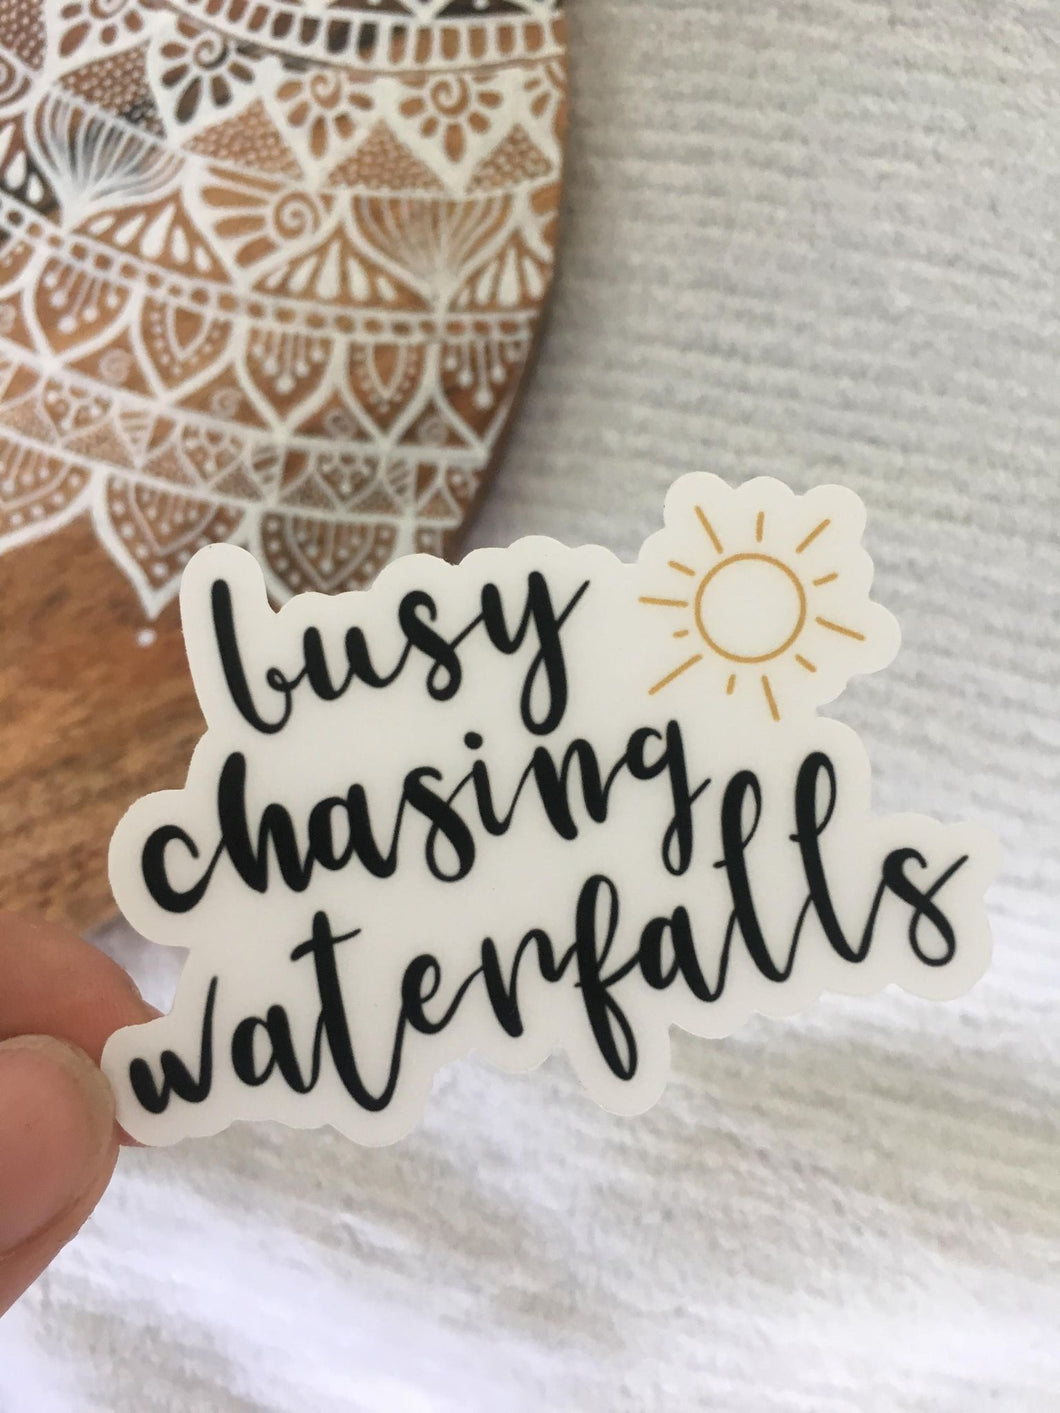 Busy Chasing Waterfalls Clear Sticker